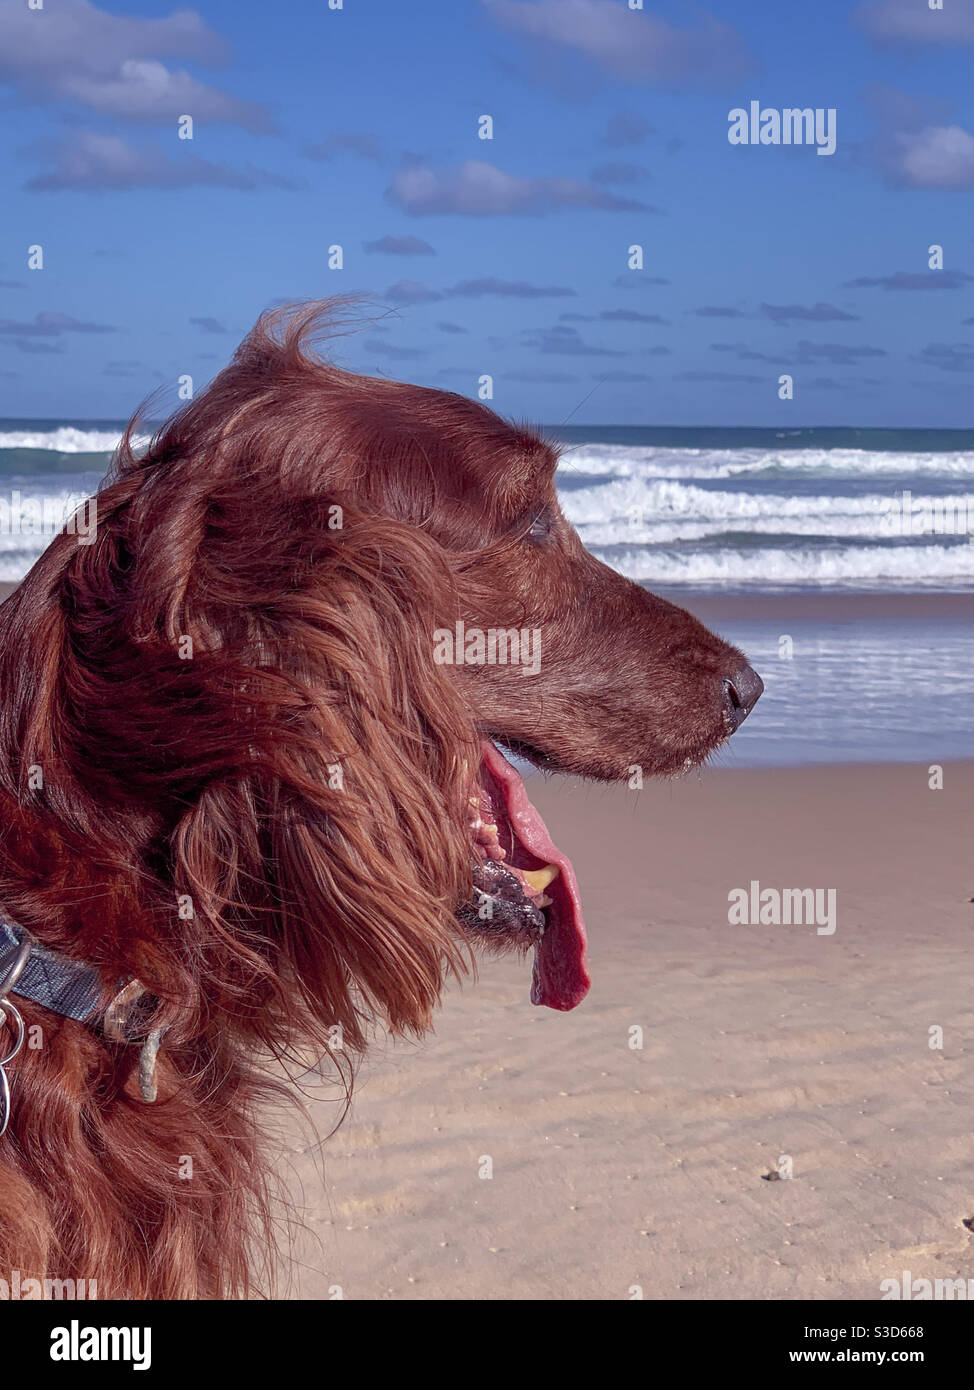 Hot dog, Irish Setter dog with his tongue hanging out on an Australian beach on a Summer’s afternoon with waves rolling in the background Stock Photo